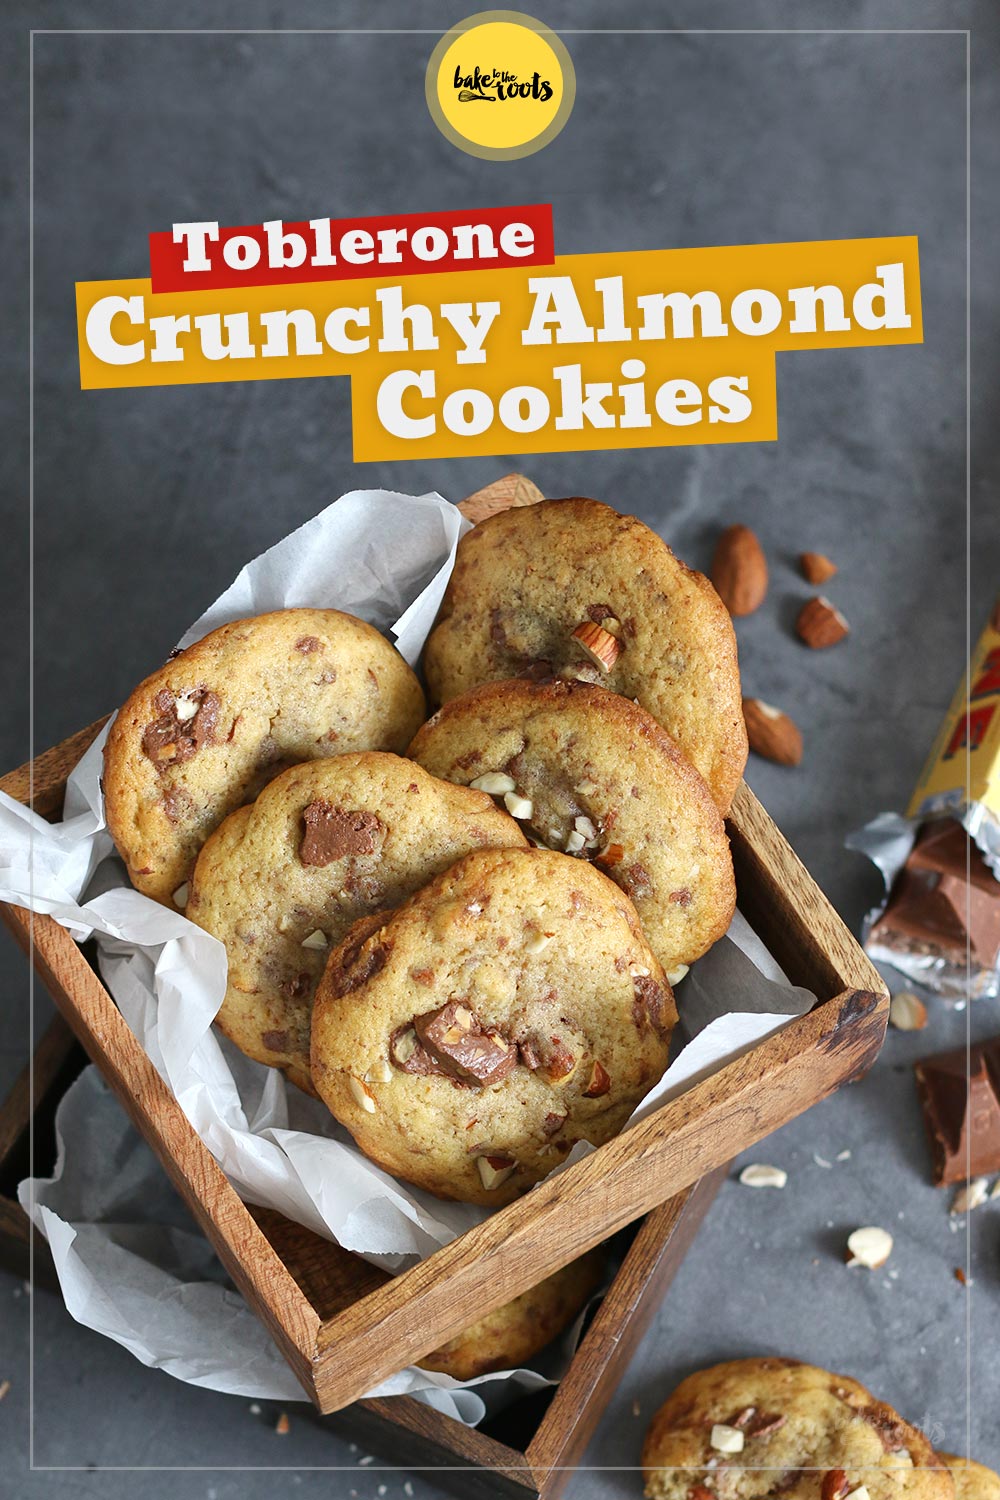 Toblerone Crunchy Almond Cookies | Bake to the roots